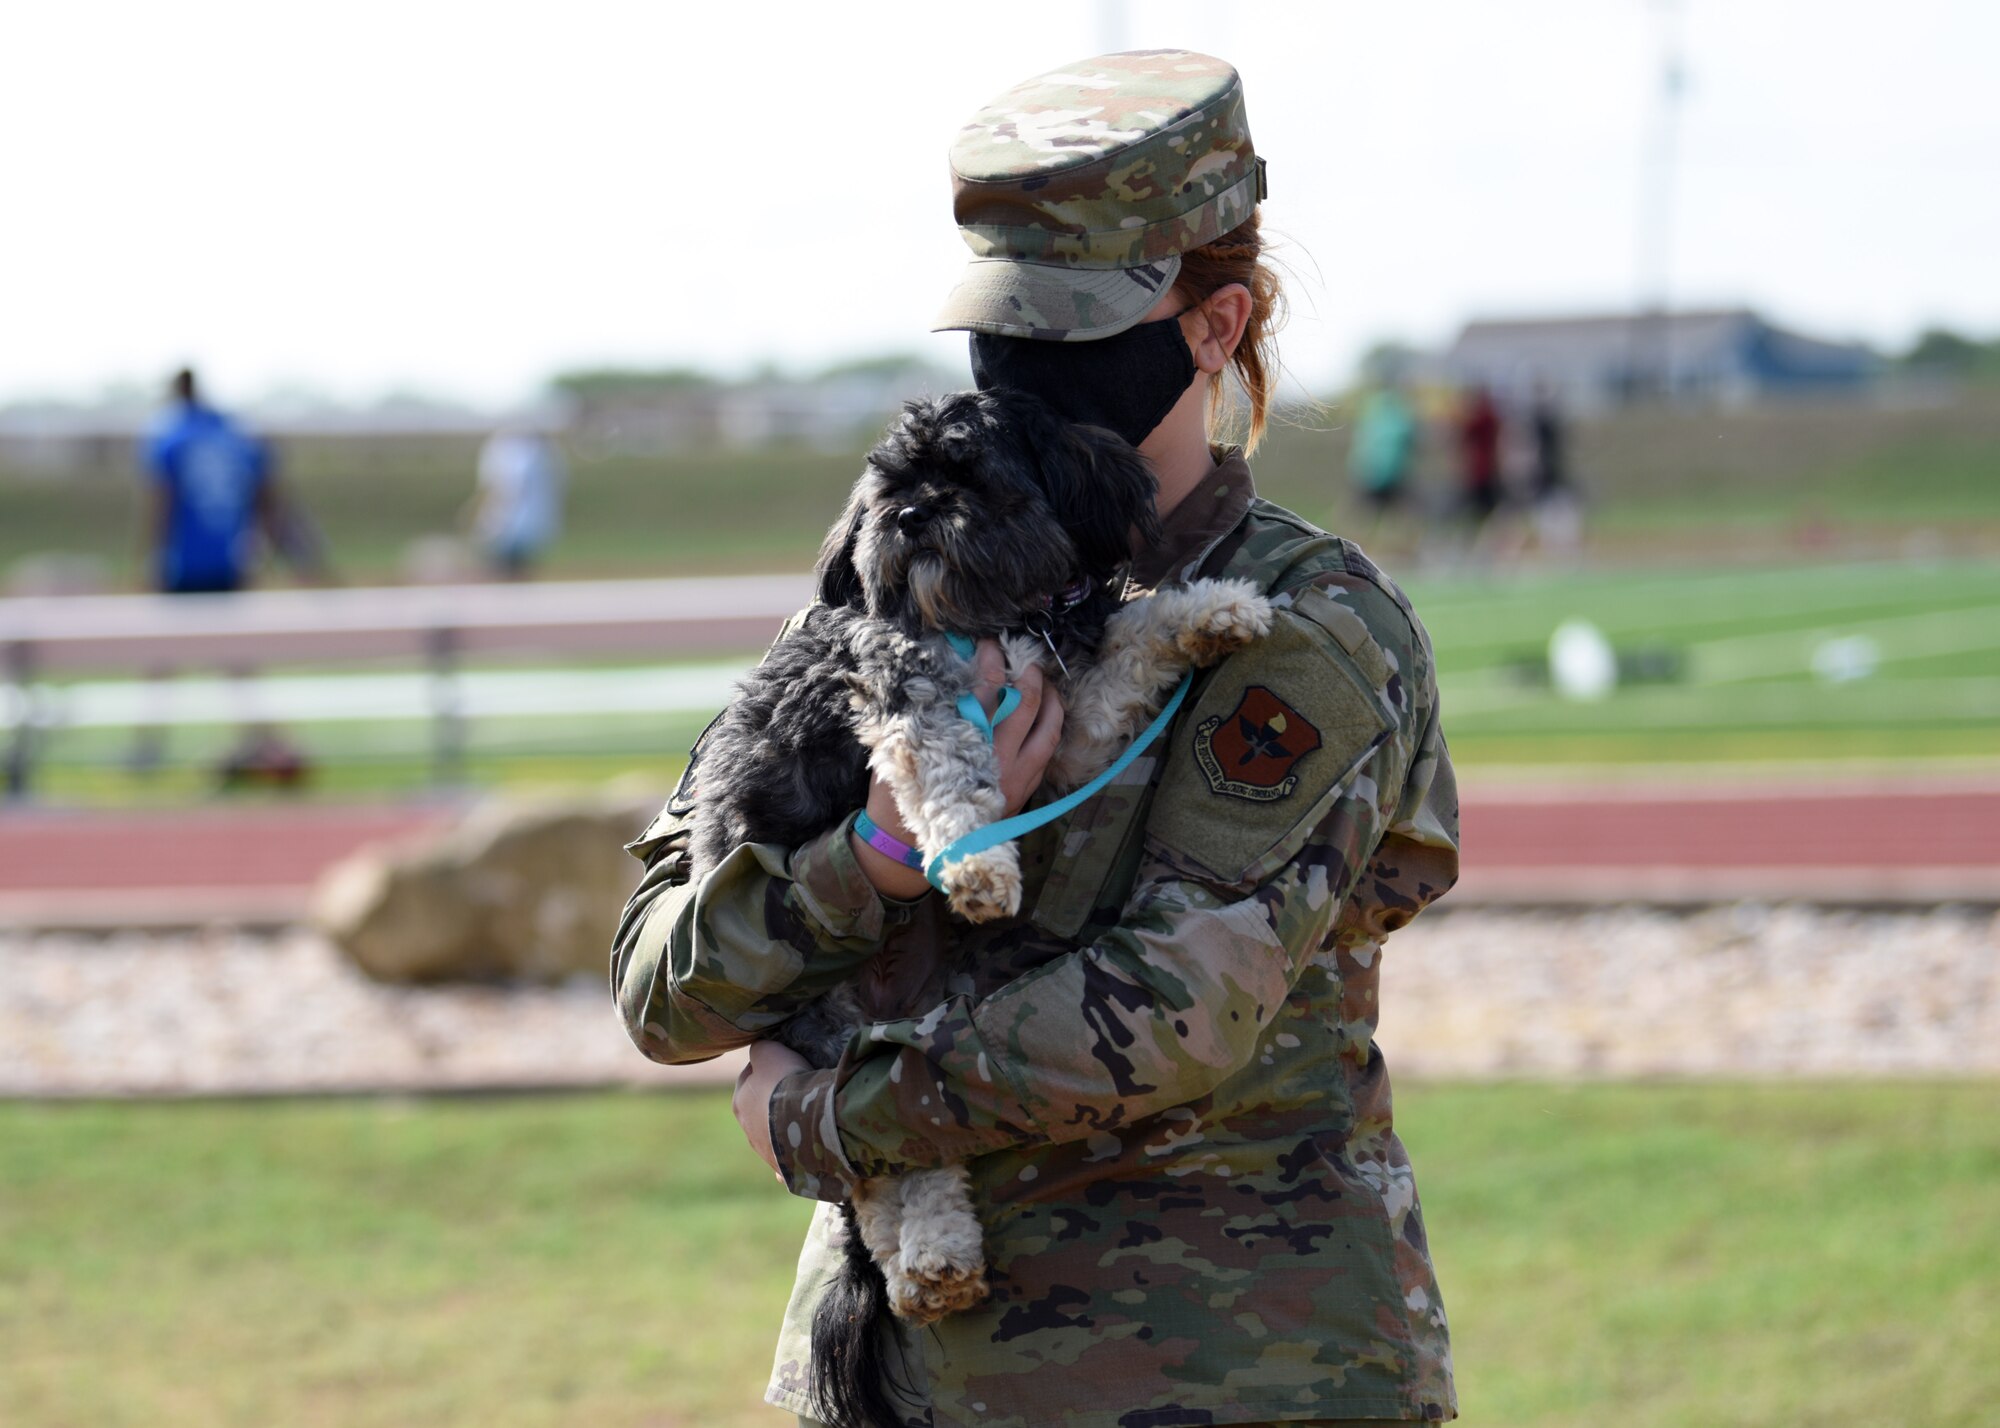 A member of Goodfellow holds a dog from Cassie’s Place at the Mathis Field Track on Goodfellow Air Force Base, Texas, Sept. 18, 2020. Dogs are periodically brought on base to aid in Goodfellow’s fight against suicide. (U.S. Air Force photo by Airman 1st Class Ethan Sherwood)